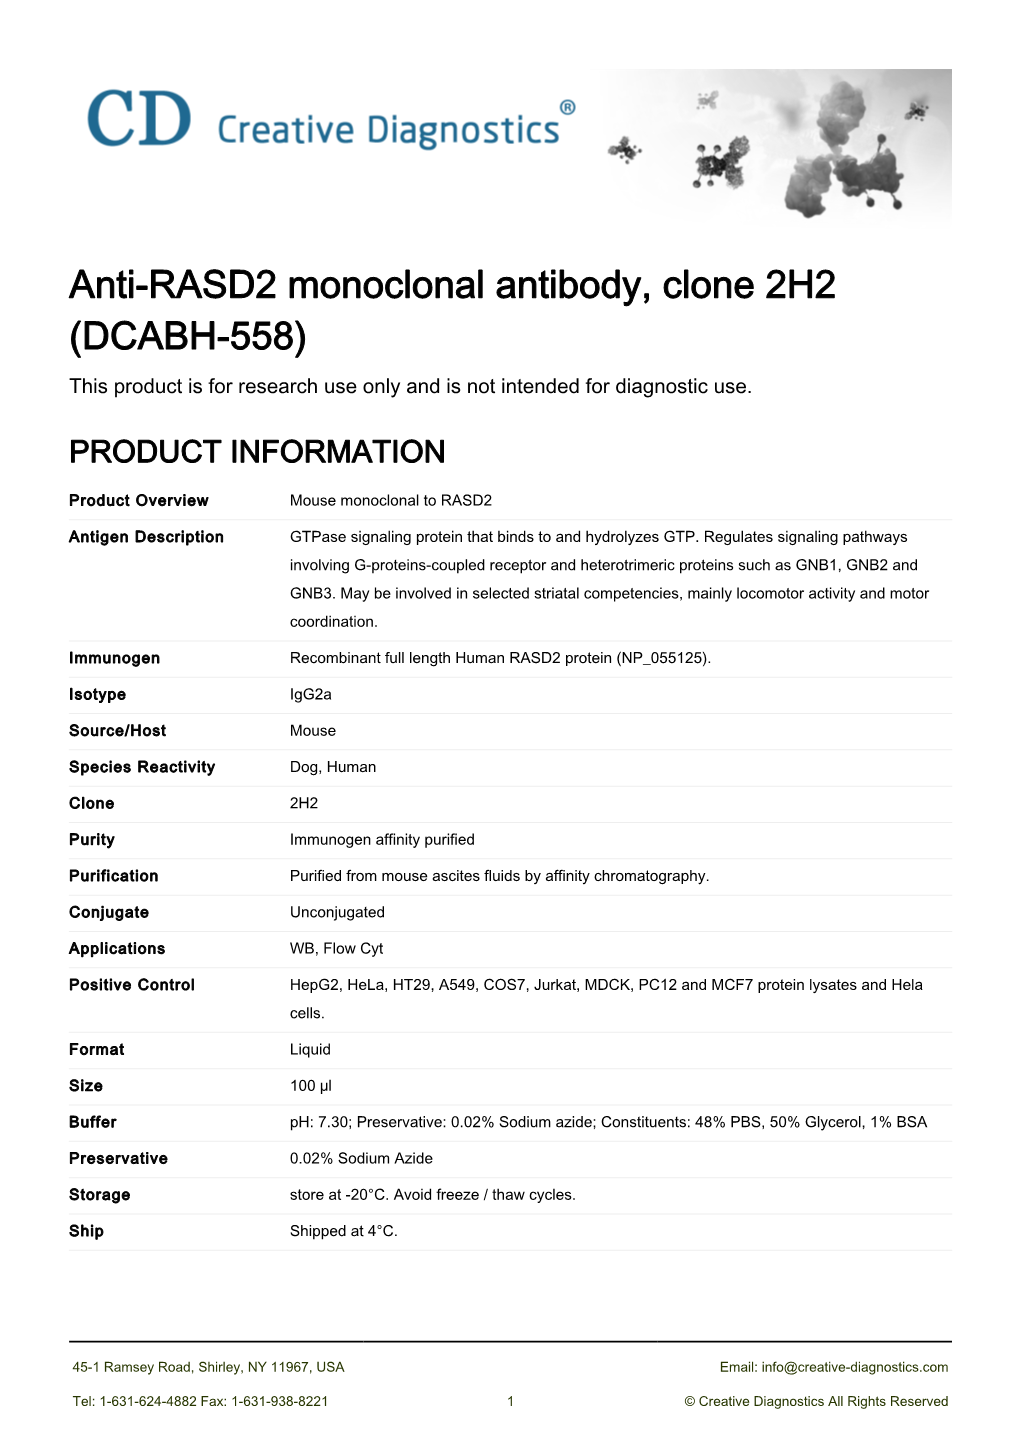 Anti-RASD2 Monoclonal Antibody, Clone 2H2 (DCABH-558) This Product Is for Research Use Only and Is Not Intended for Diagnostic Use